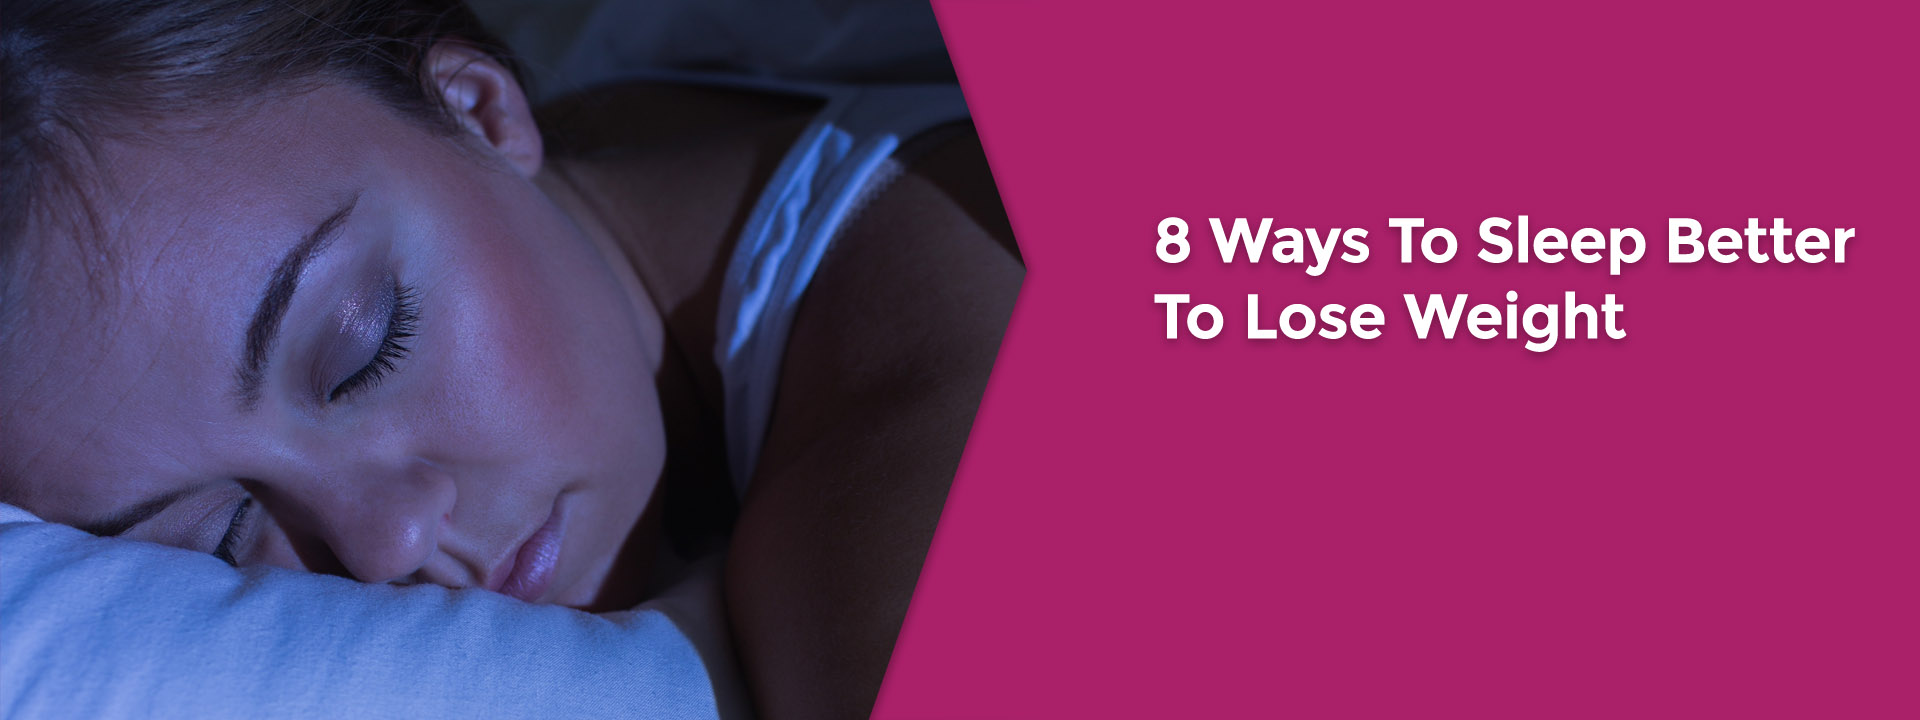 8 Ways To Sleep Better To Lose Weight